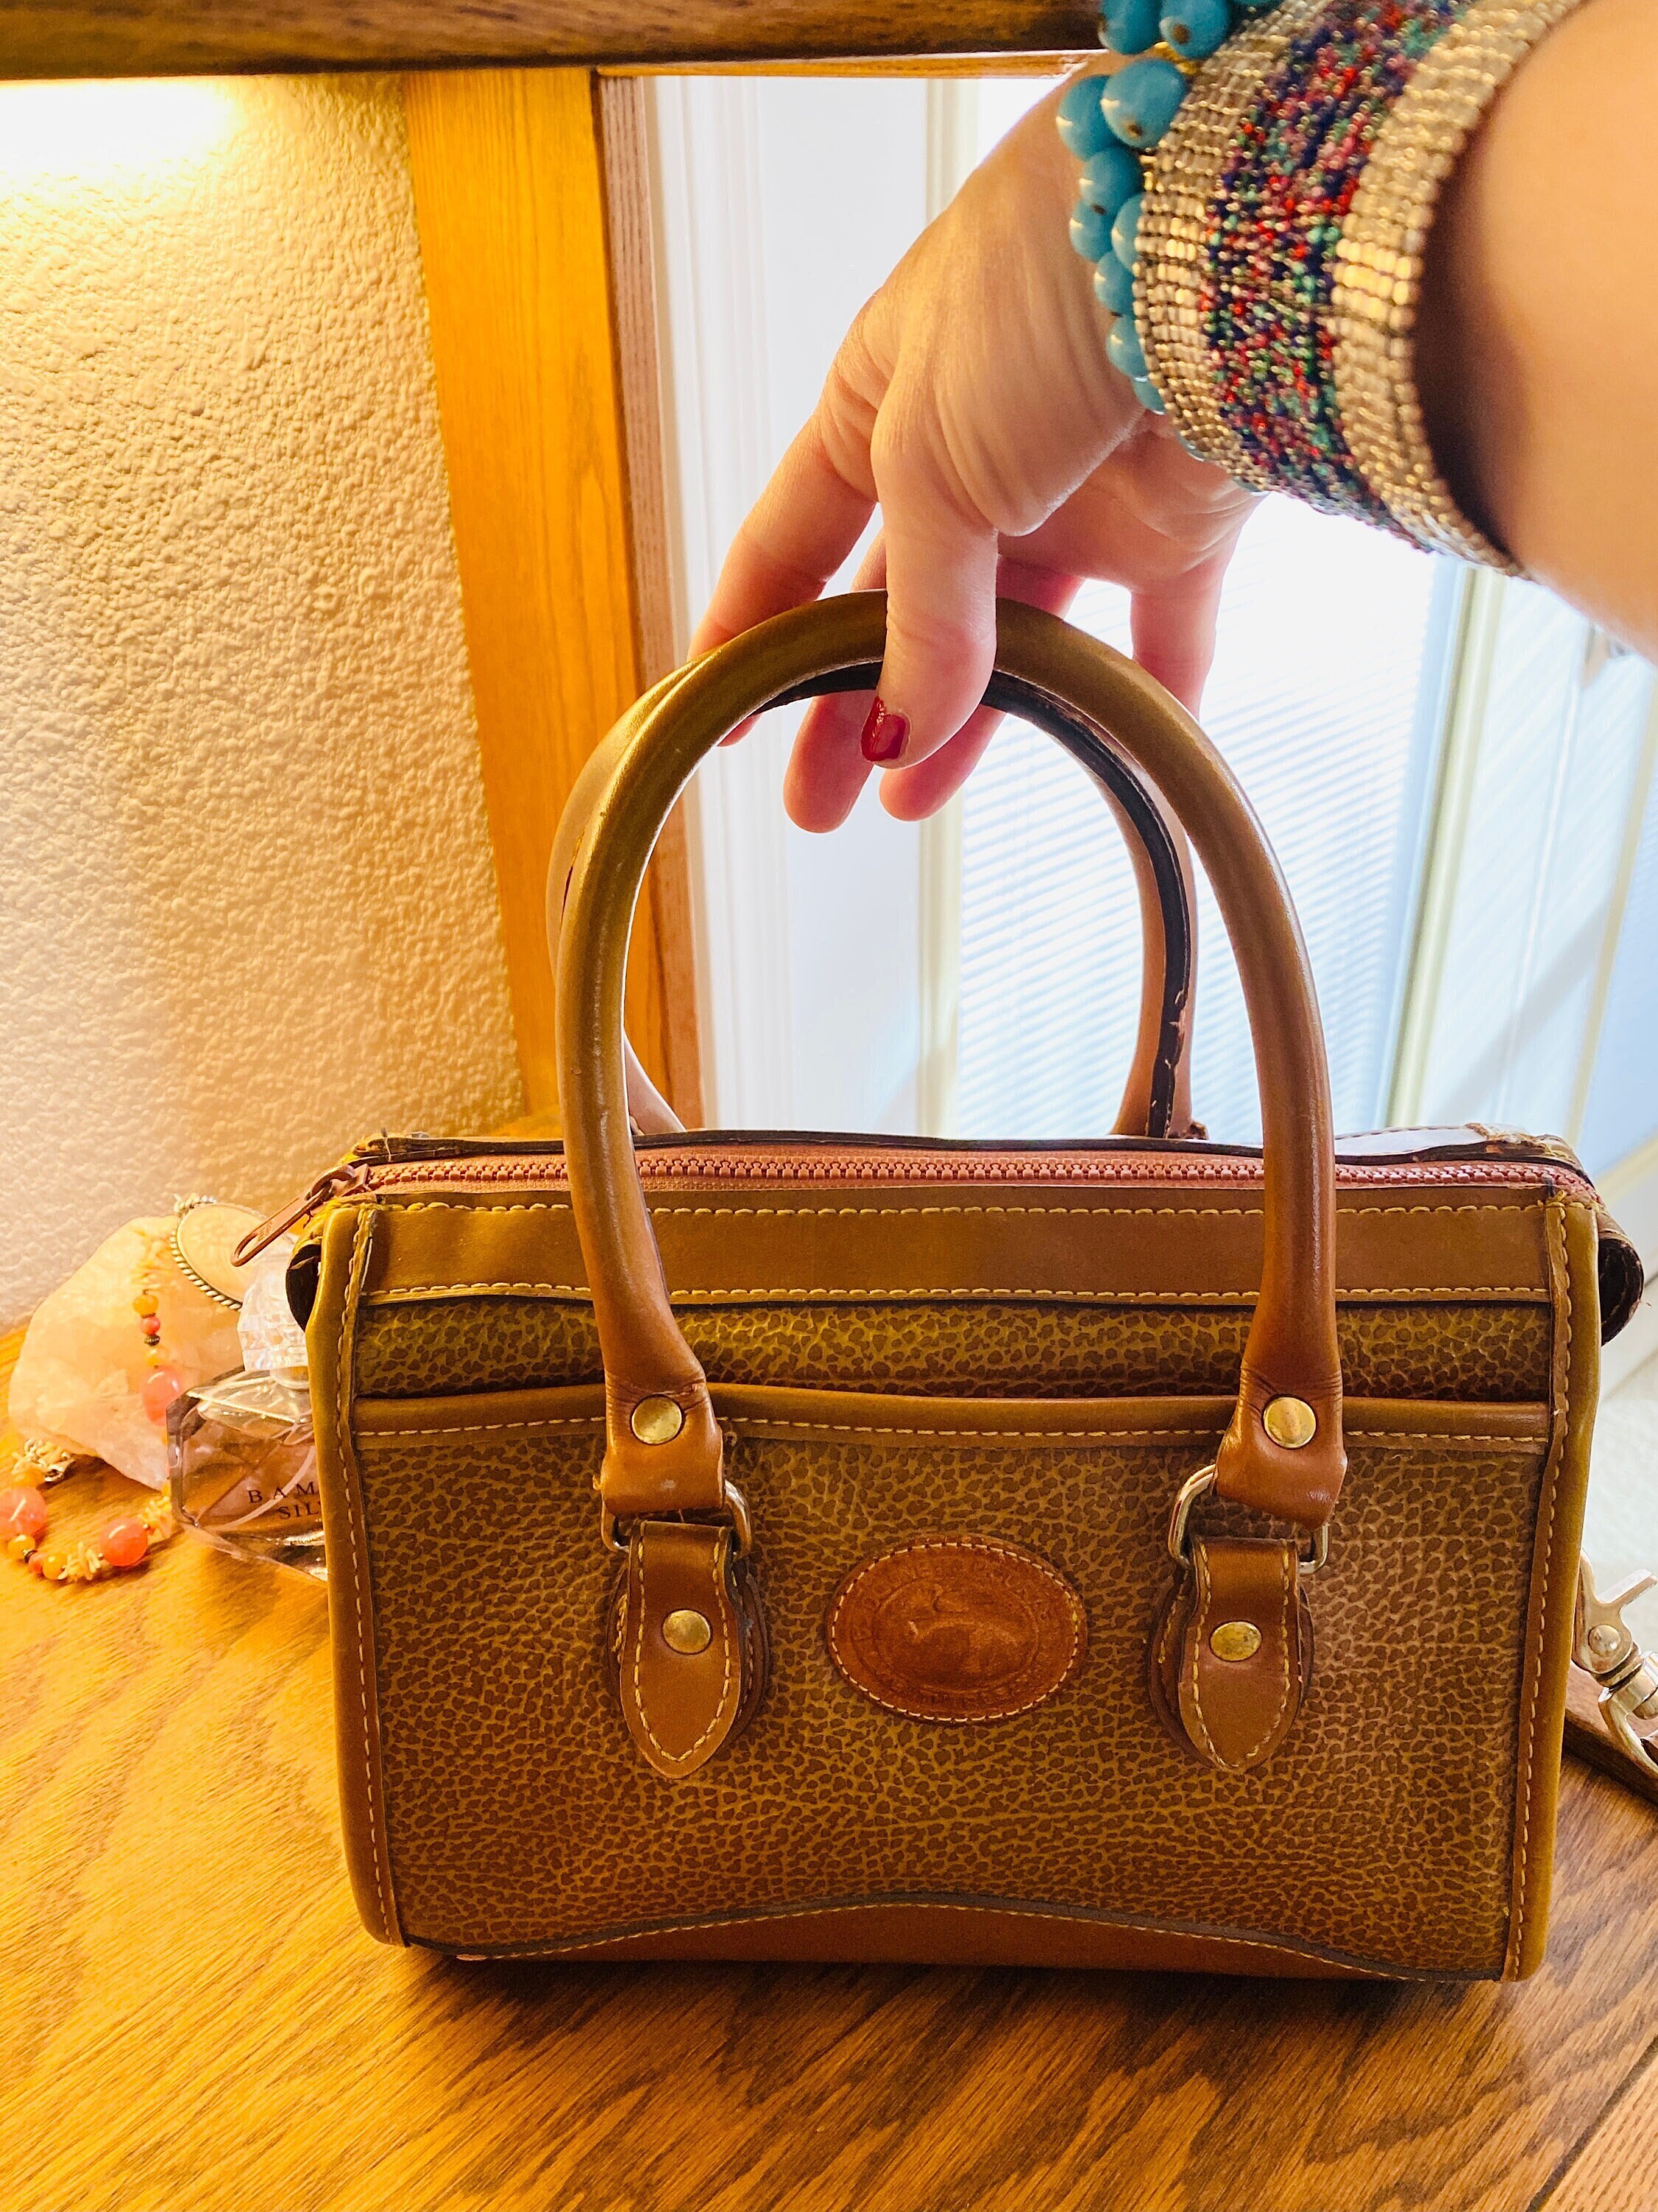 6 Designer Vintage Leather Handbags With Cute Looks and High Quality